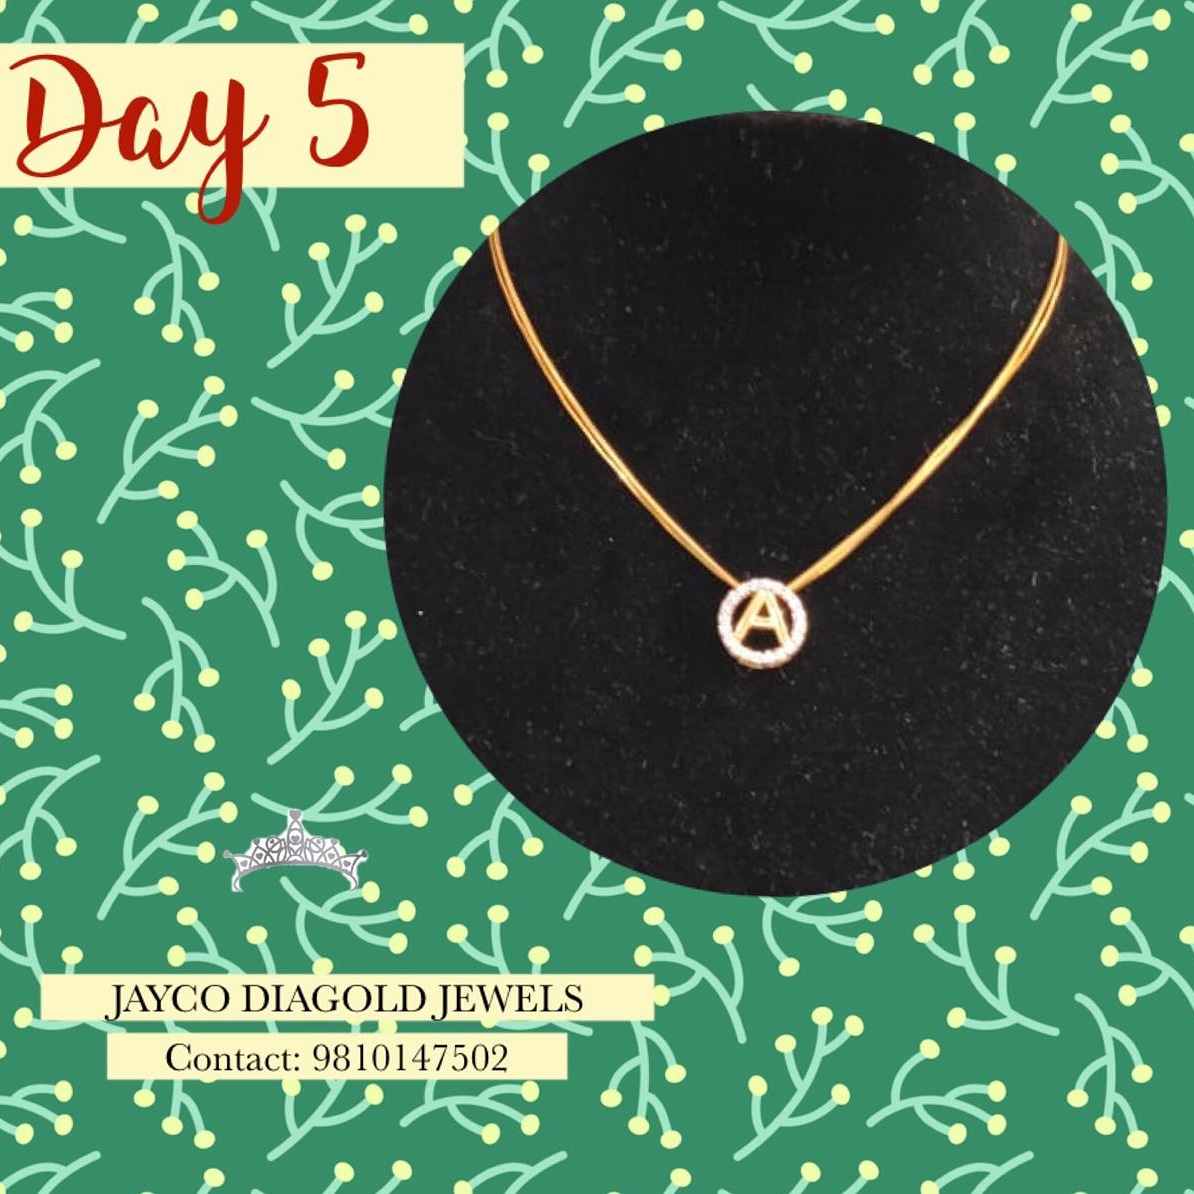 Can you believe that Christmas is 5 days away 😳😍✨
Hurry and get your favourite holiday jewellery ❤ 
Jayco diagold jewels 💎 
Contact: 9810147502

#necklace #jewellerydesign #jewellery #diamondjewellery #jewelleryofinstagram #goldjewellery